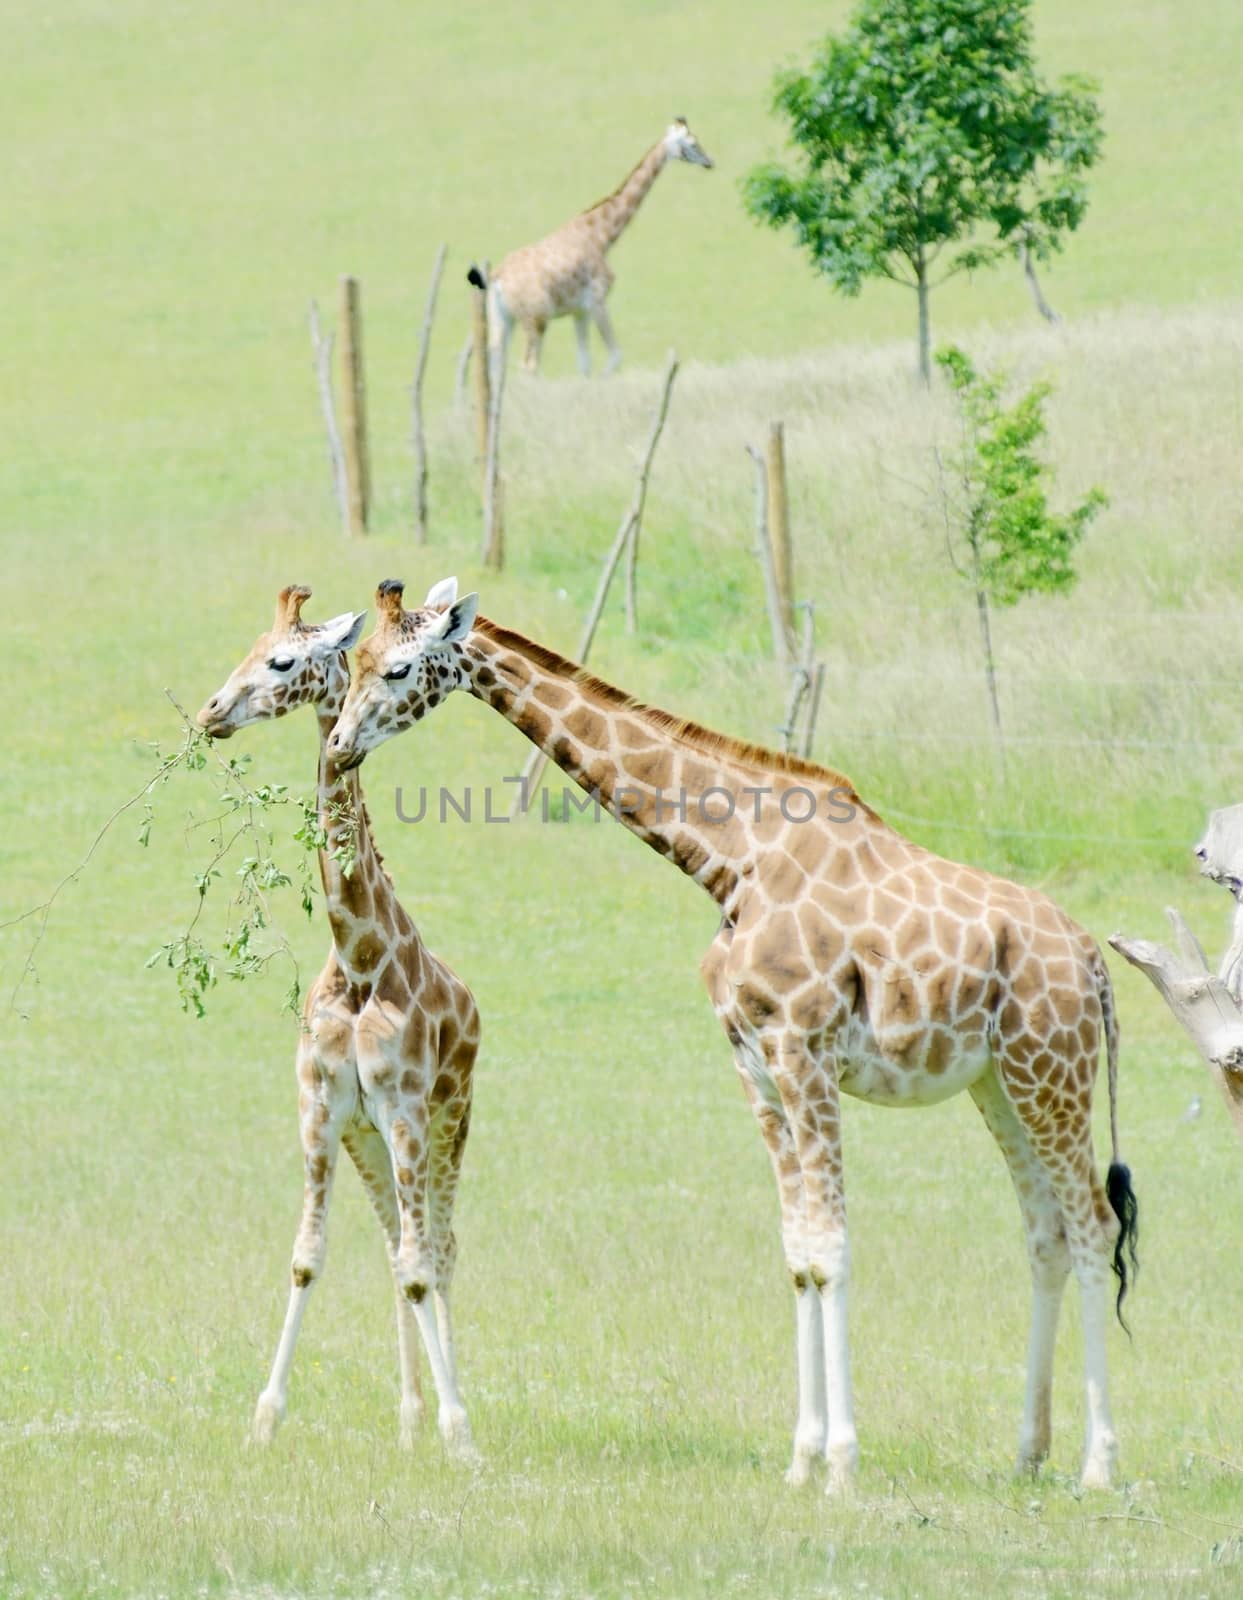 Giraffe mother and baby by kmwphotography